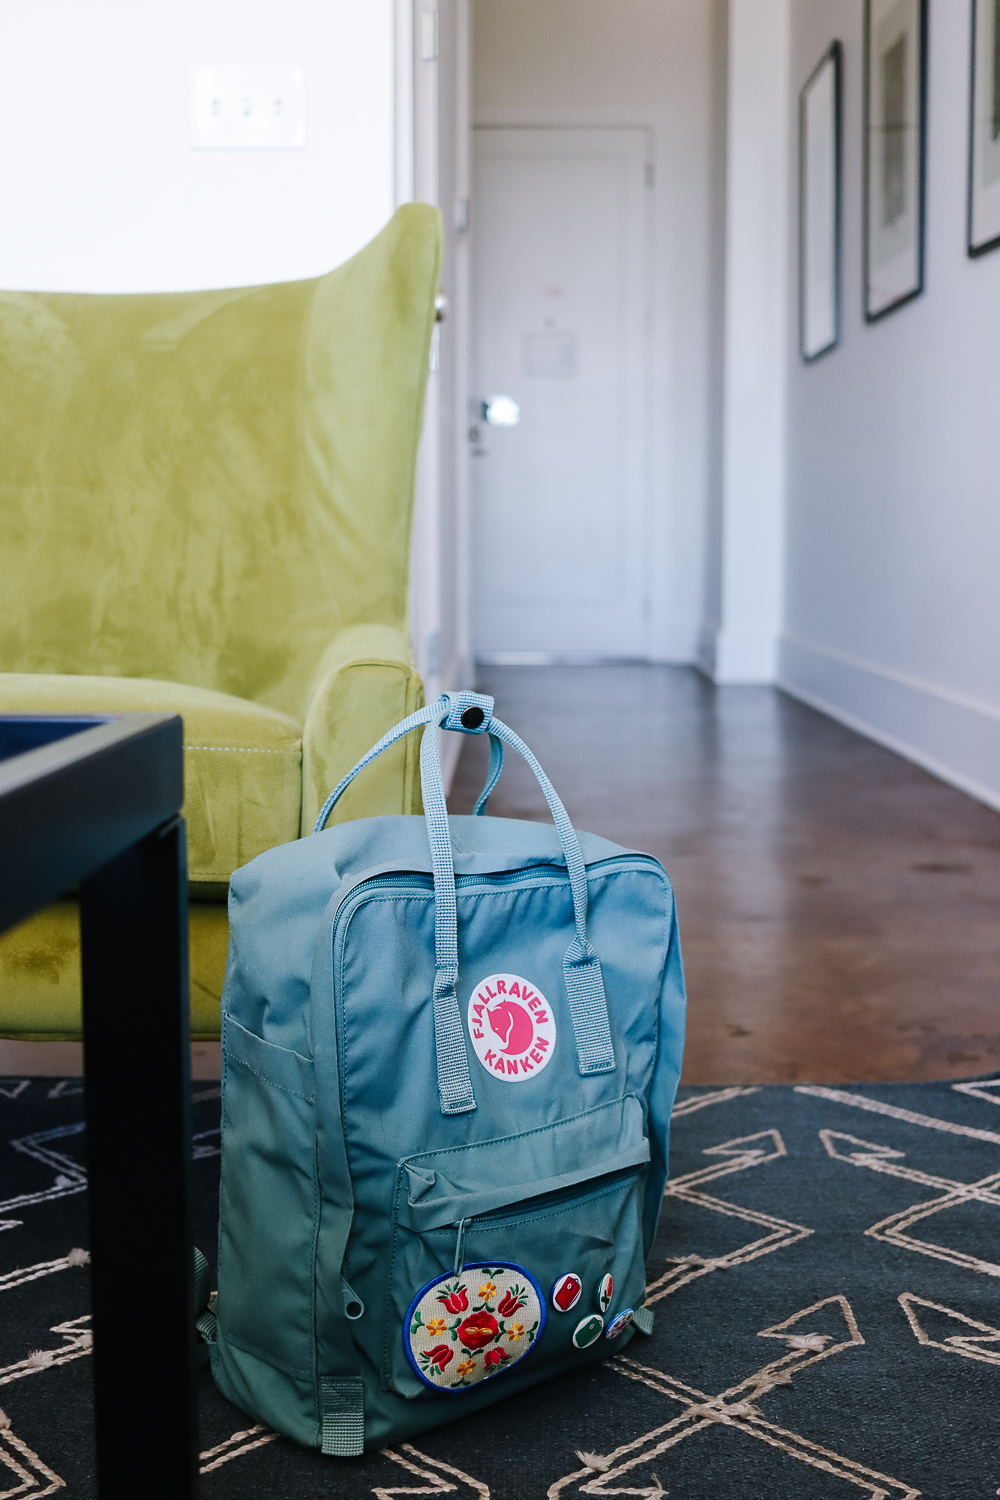 fjallraven backpack with pins + patches | Finding Beautiful Truth